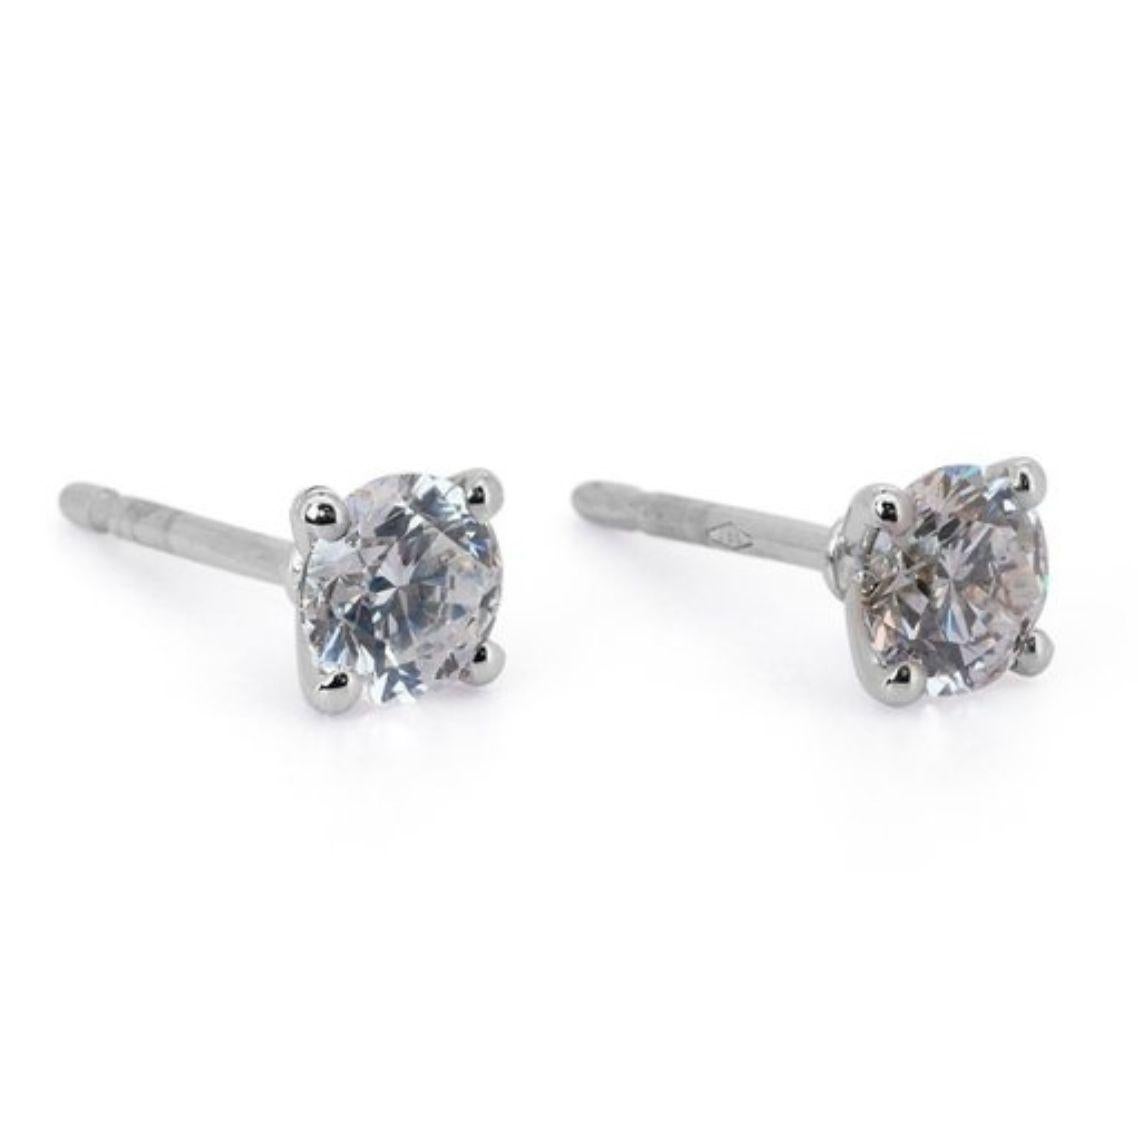 Unleash mesmerizing fire with these captivating 1.8 carat diamond stud earrings, handcrafted in lustrous 18K white gold. Each earring features a breathtaking Round Brilliant diamond, boasting an elegant F color and near-flawless VVS1 clarity. The